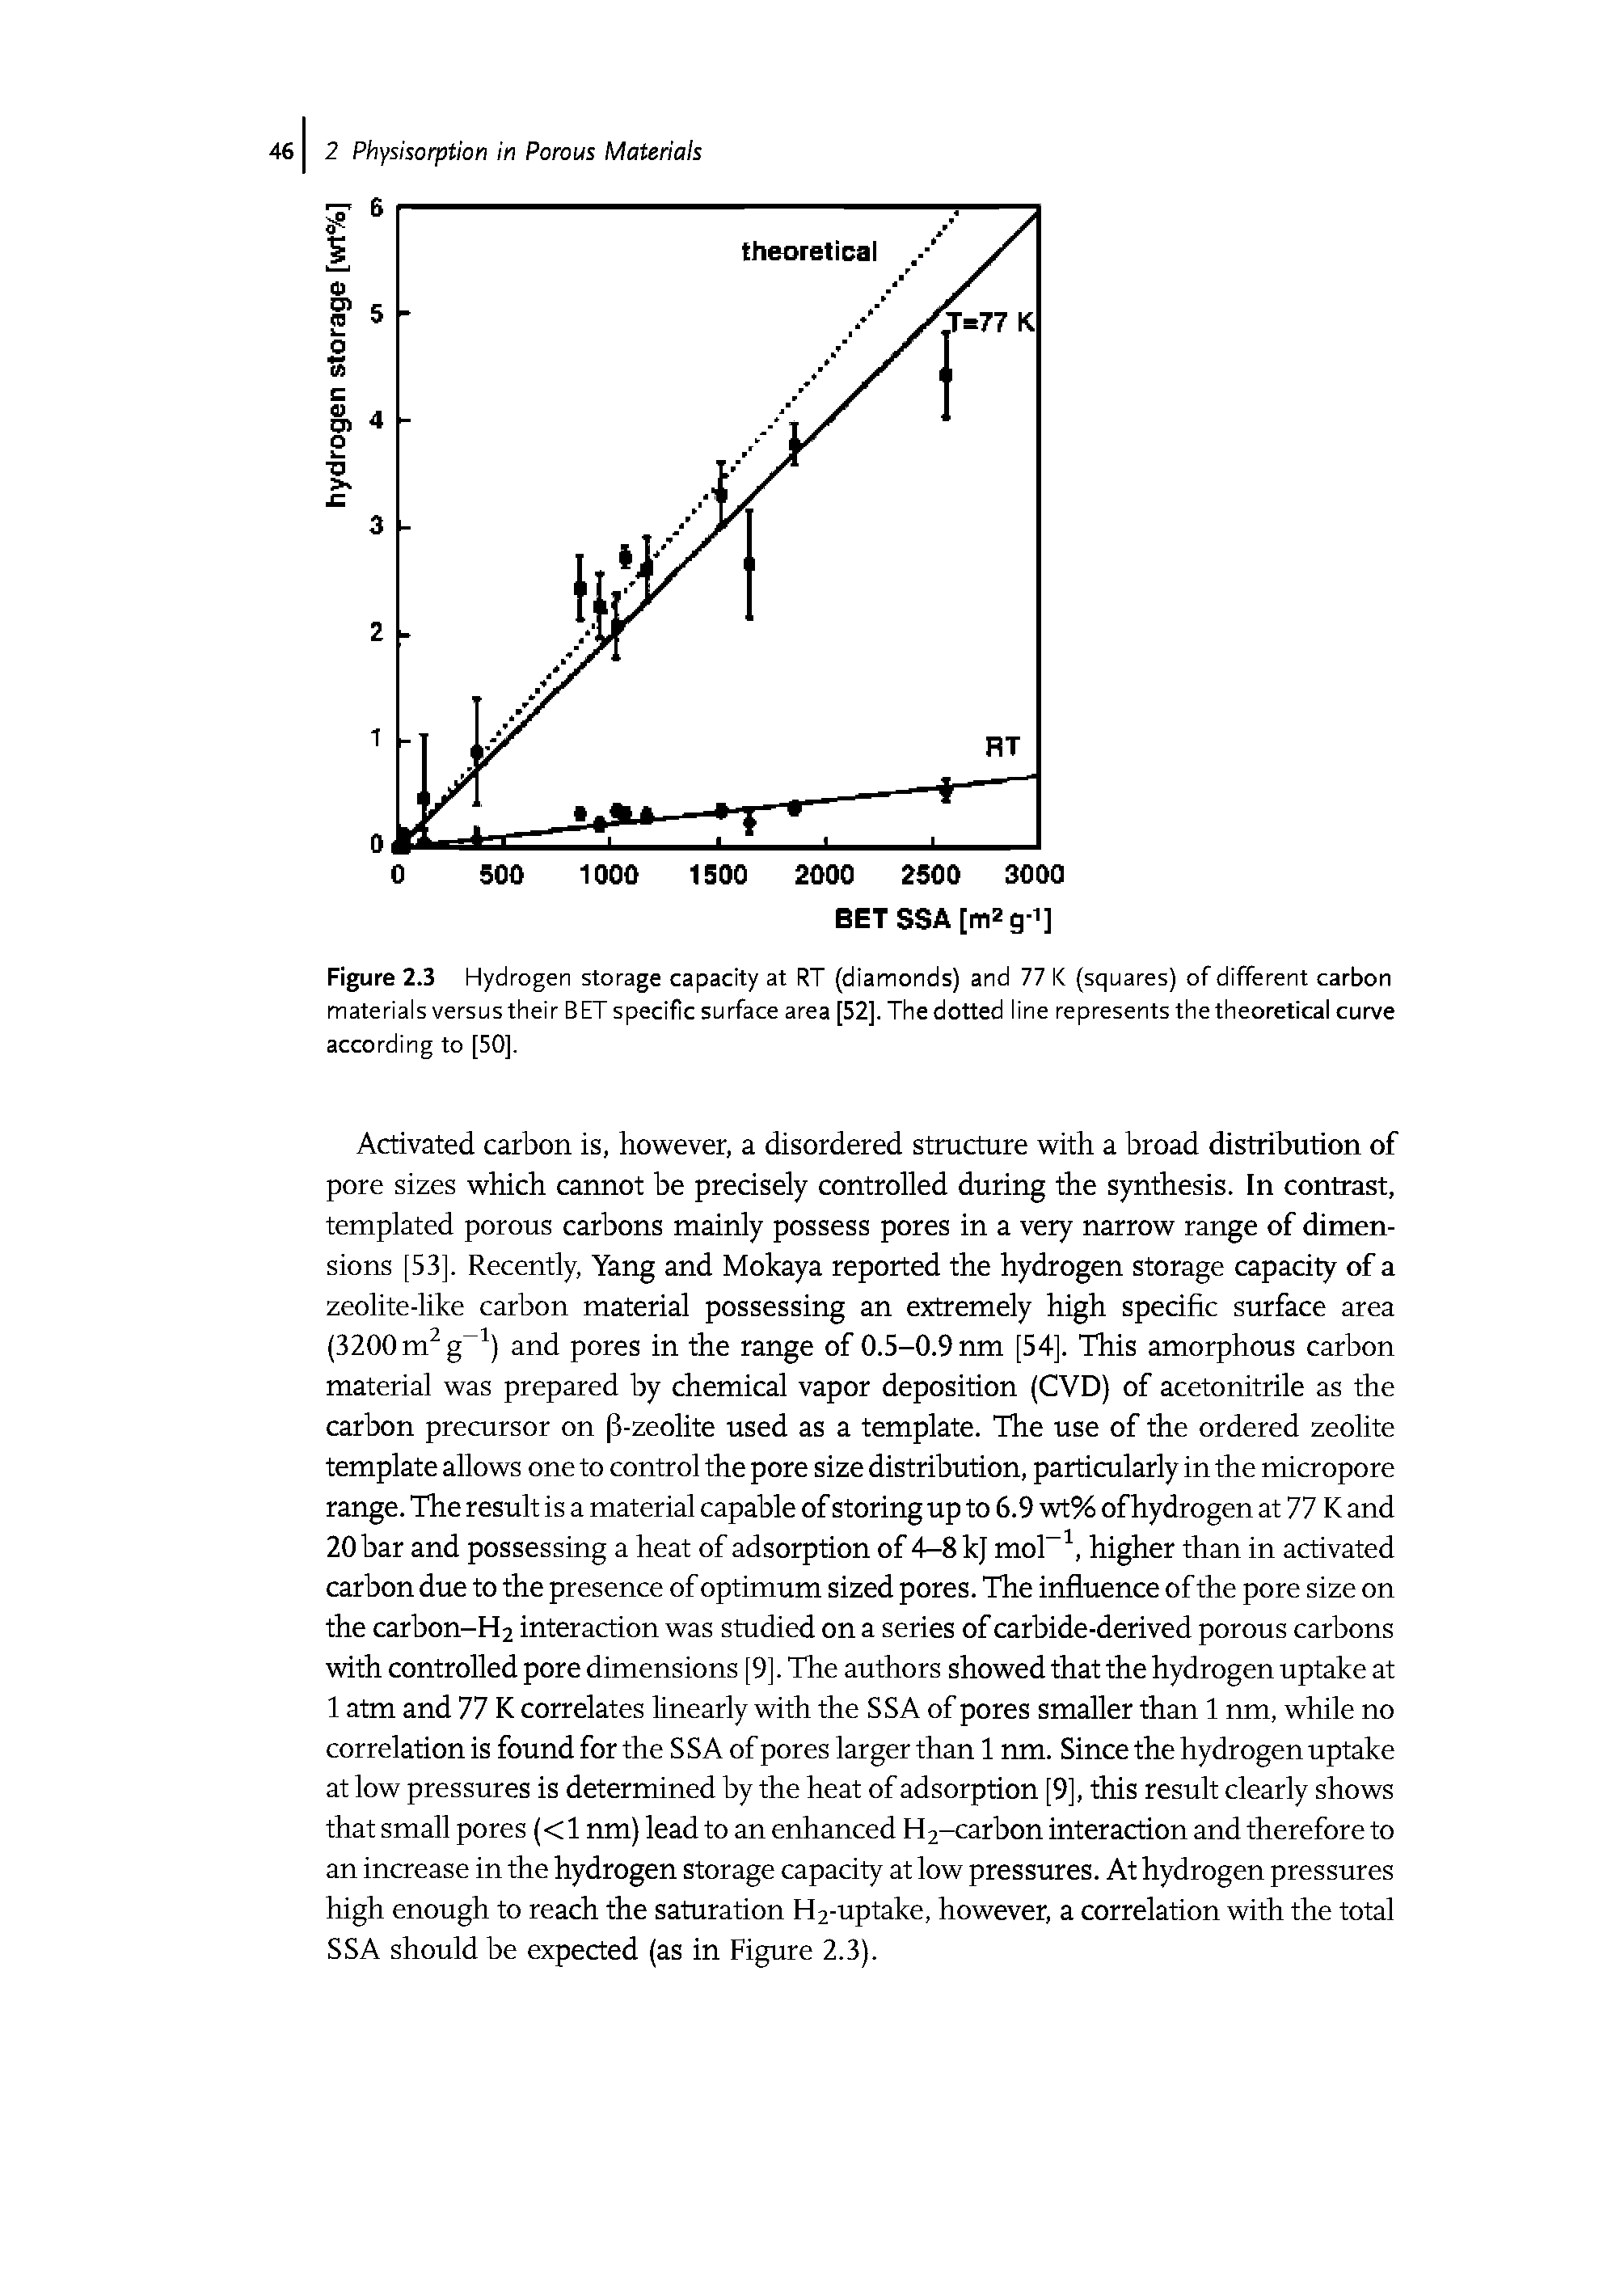 Figure 2.3 Hydrogen storage capacity at RT (diamonds) and 77 K (squares) of different carbon materials versus their BET specific surface area [52]. The dotted line represents the theoretical curve according to [50],...